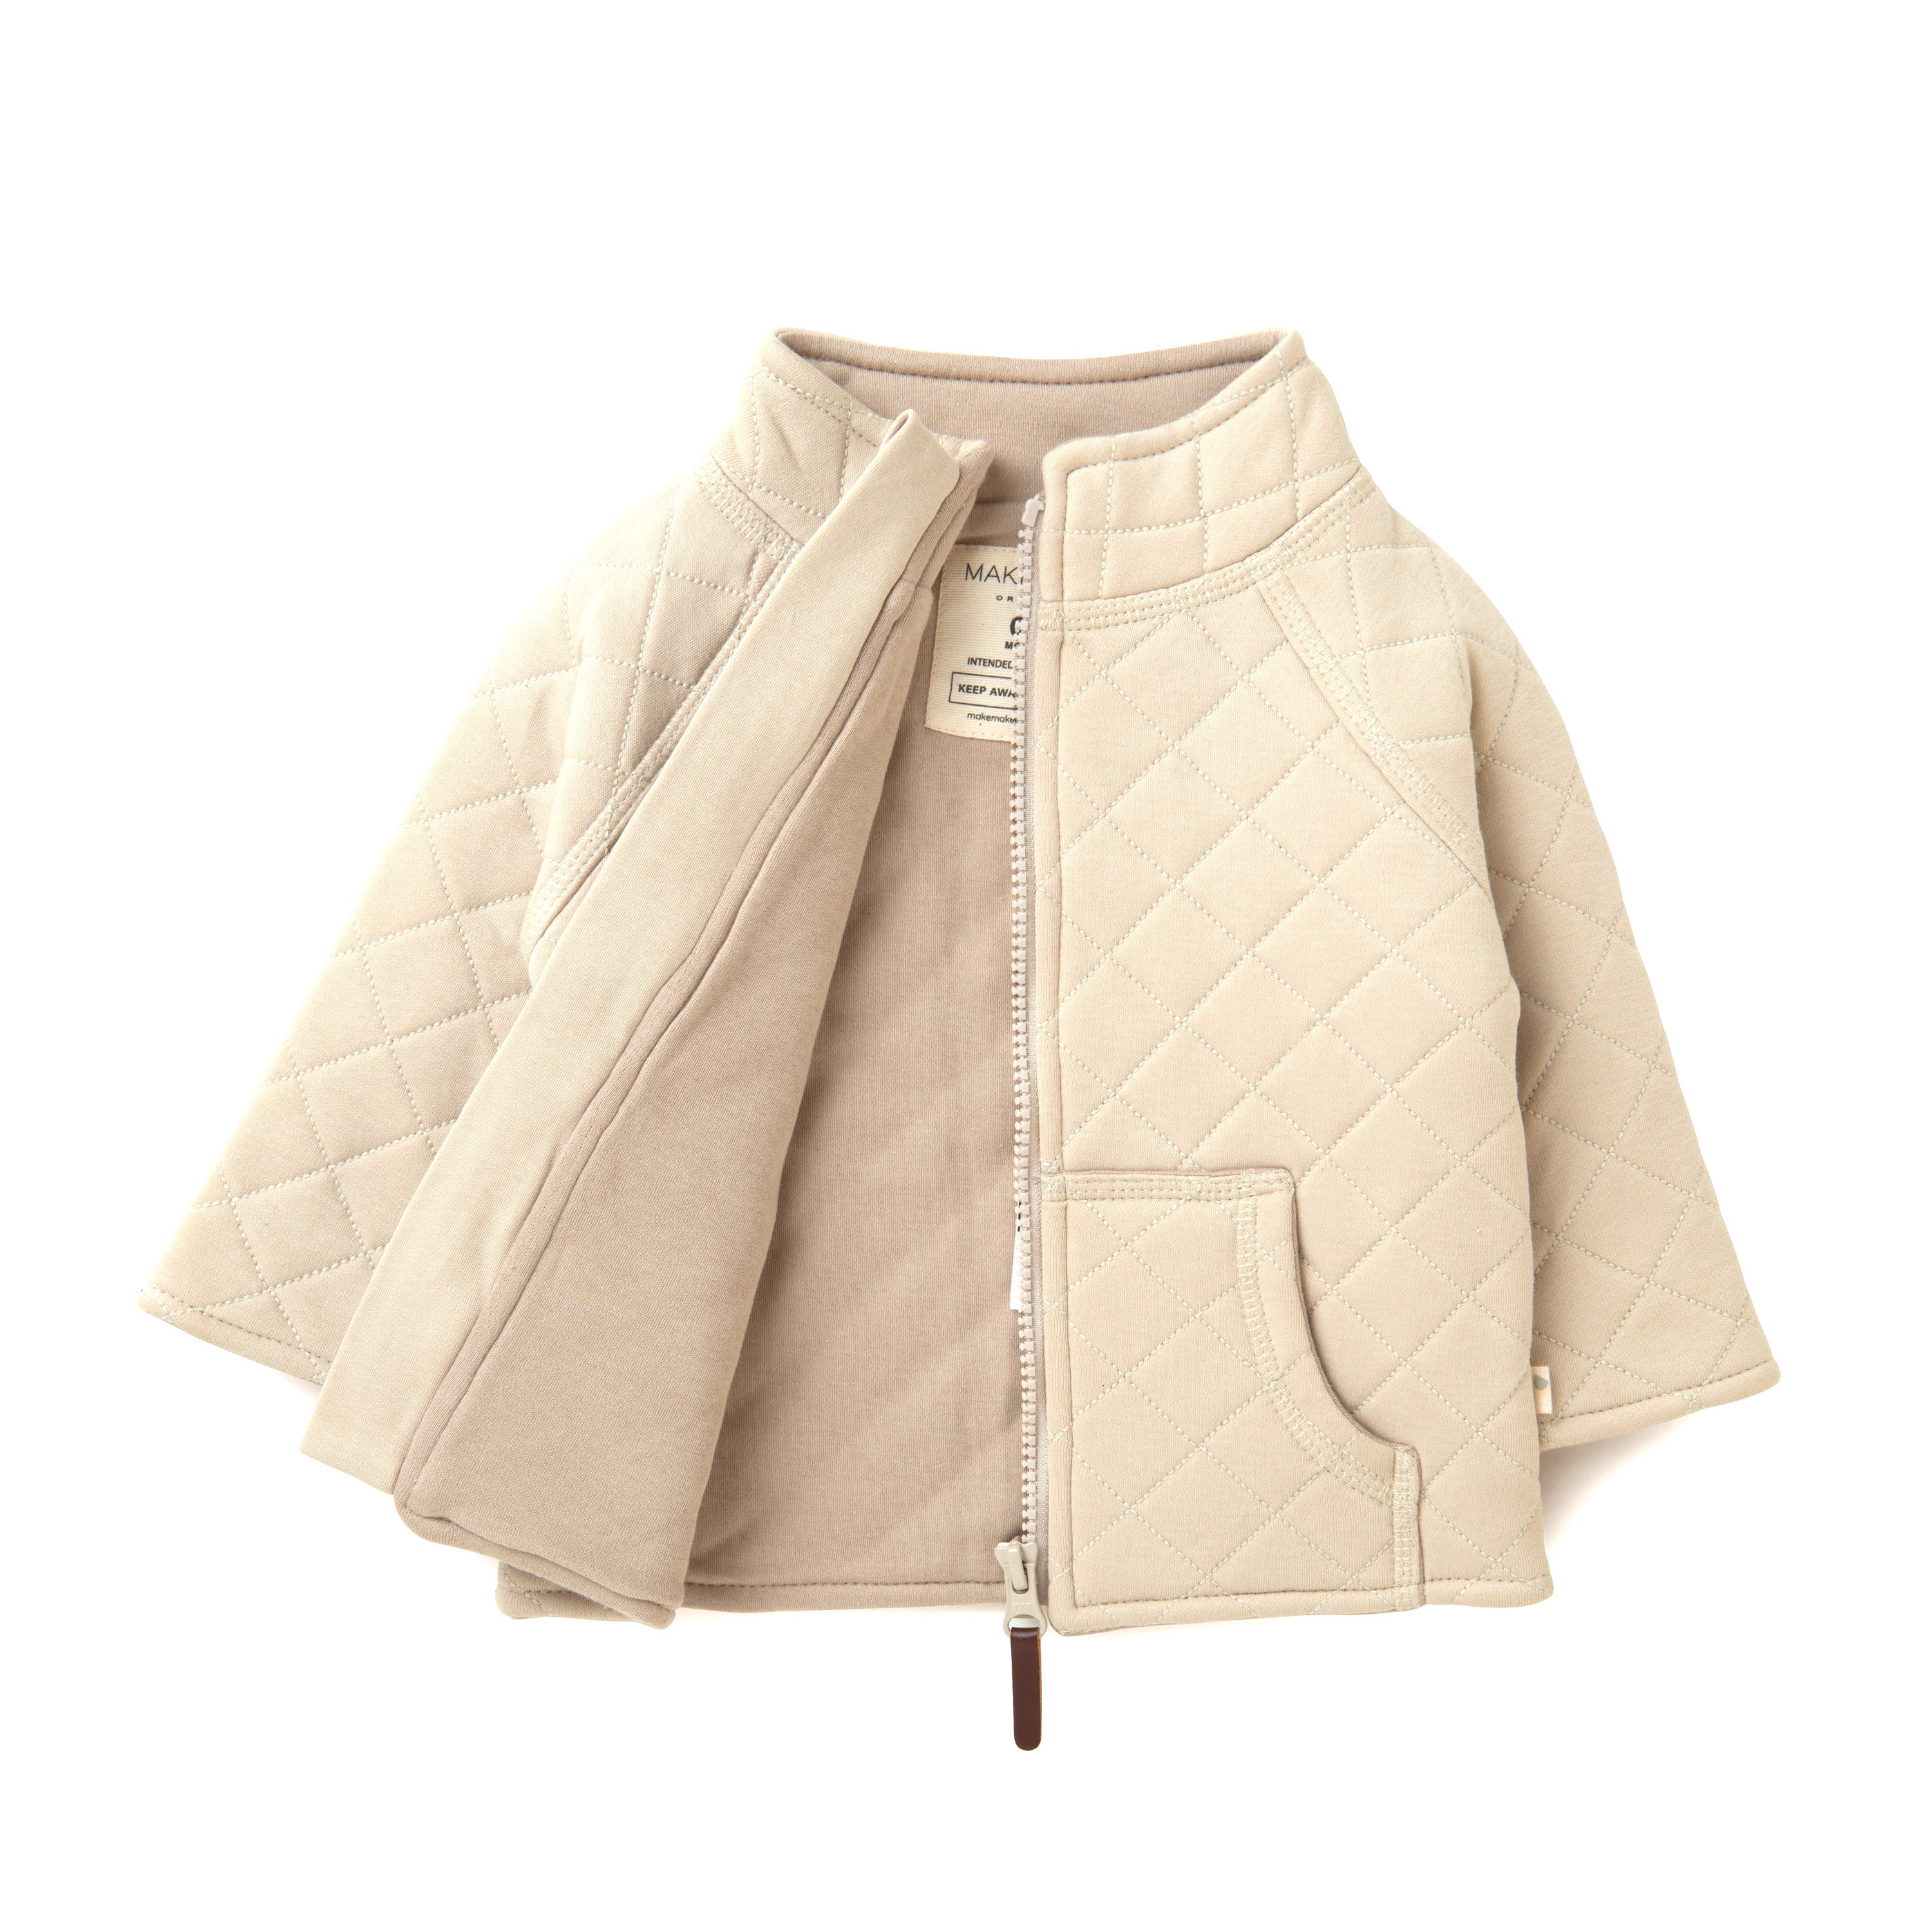 Organic Merino Wool Zip Jacket - Oat by Organic Kids with a high collar and front pocket, displayed against a white background.